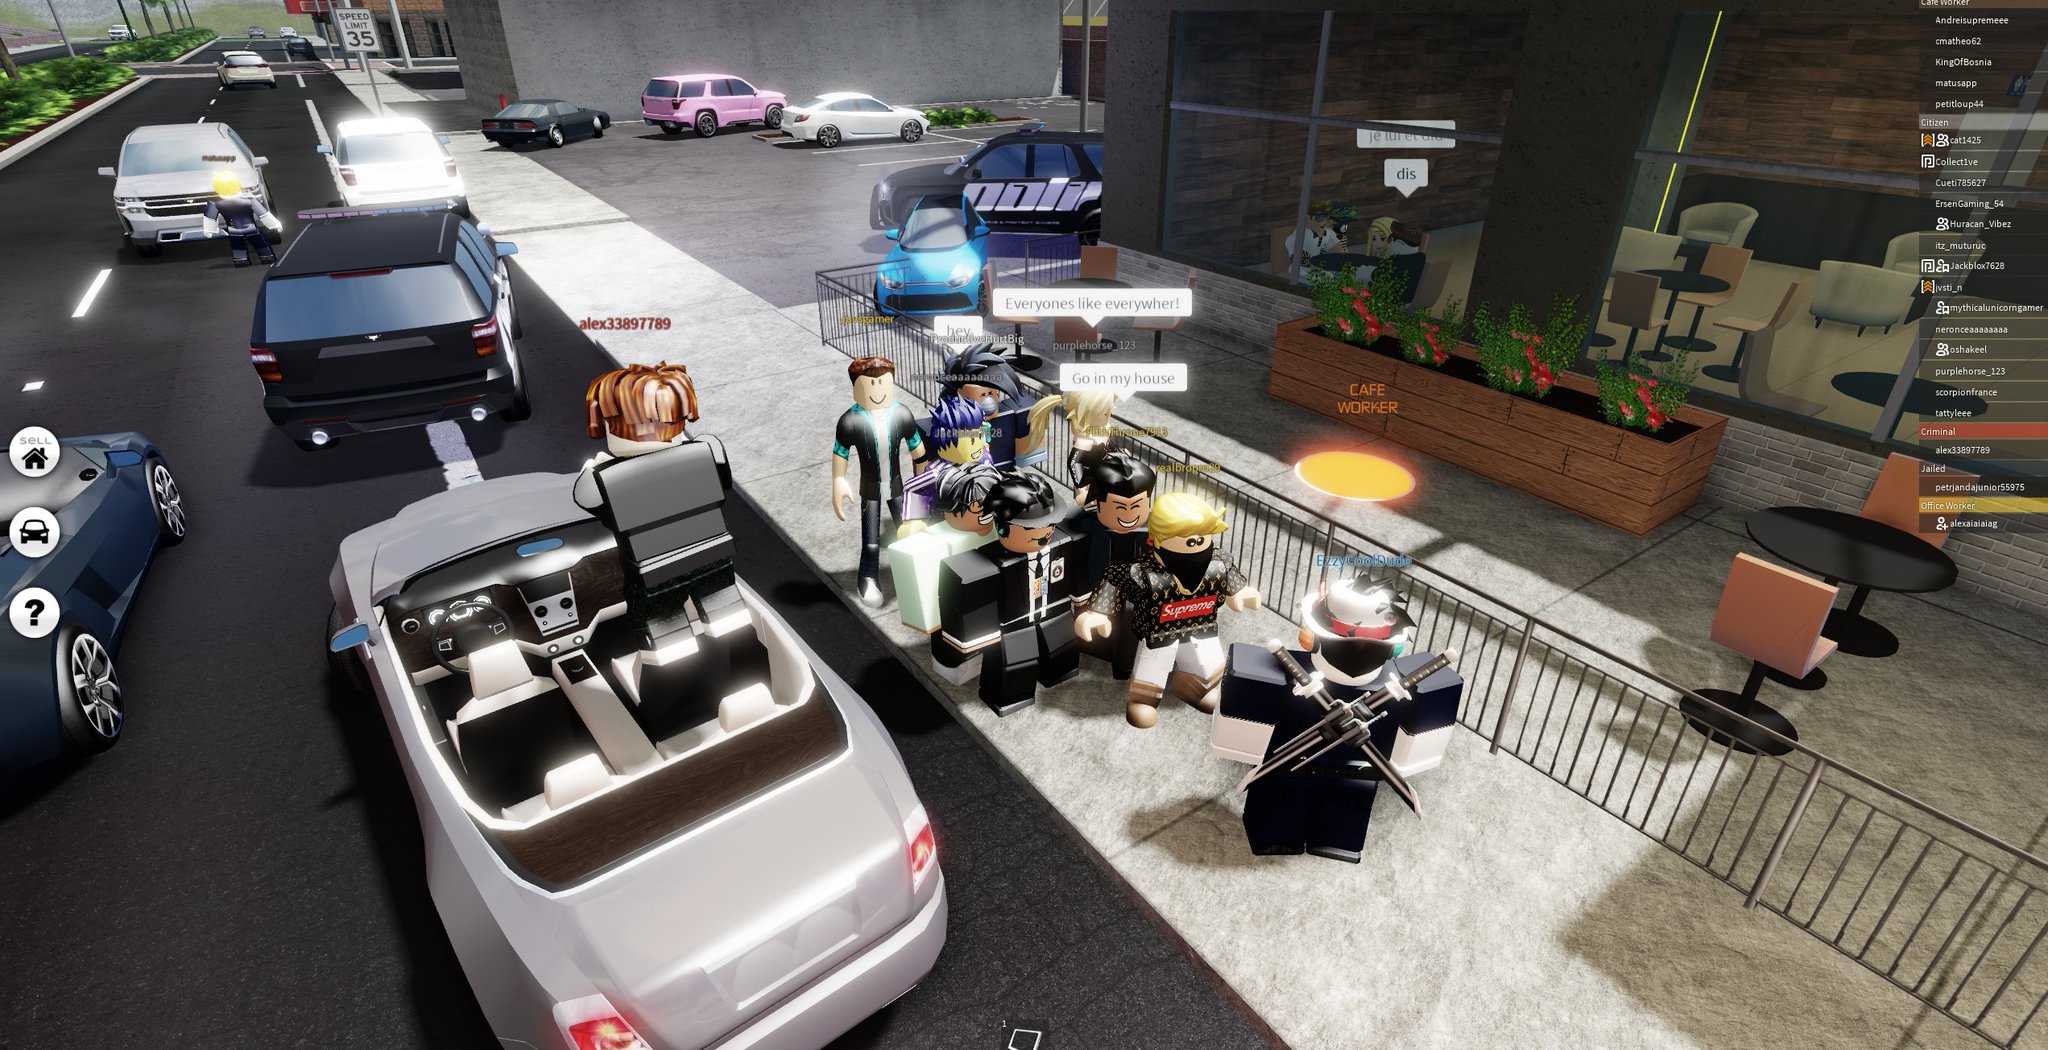 Collect1ve On Twitter Love Meeting The Community Great Bunch Of Players With Some Great Questions And Suggestions Thanks For Playing Pacifico 2 Playground Town If You Haven T Already Play Now Https T Co 3rwks1uuoq Https T Co Zdqkmrliyz - roblox pacifico 2 code